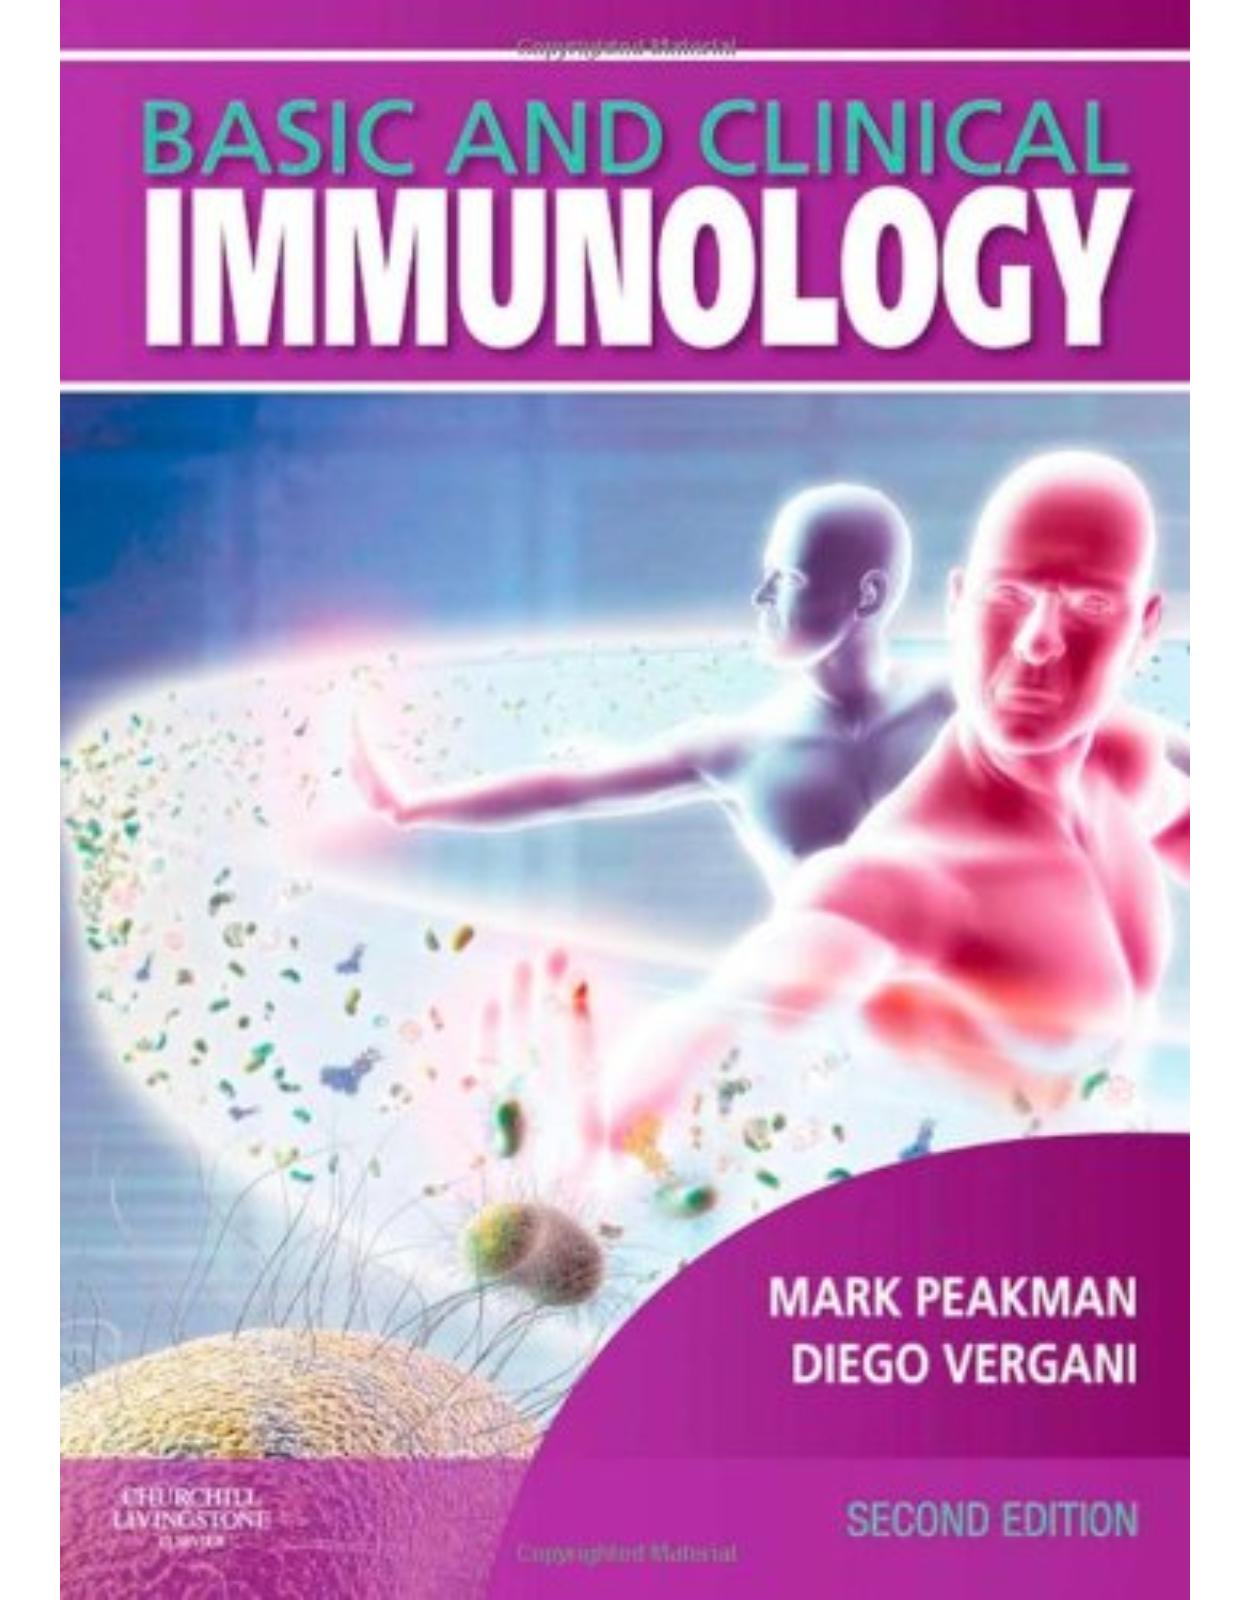 Basic and Clinical Immunology, with STUDENT CONSULT access, 2nd Edition